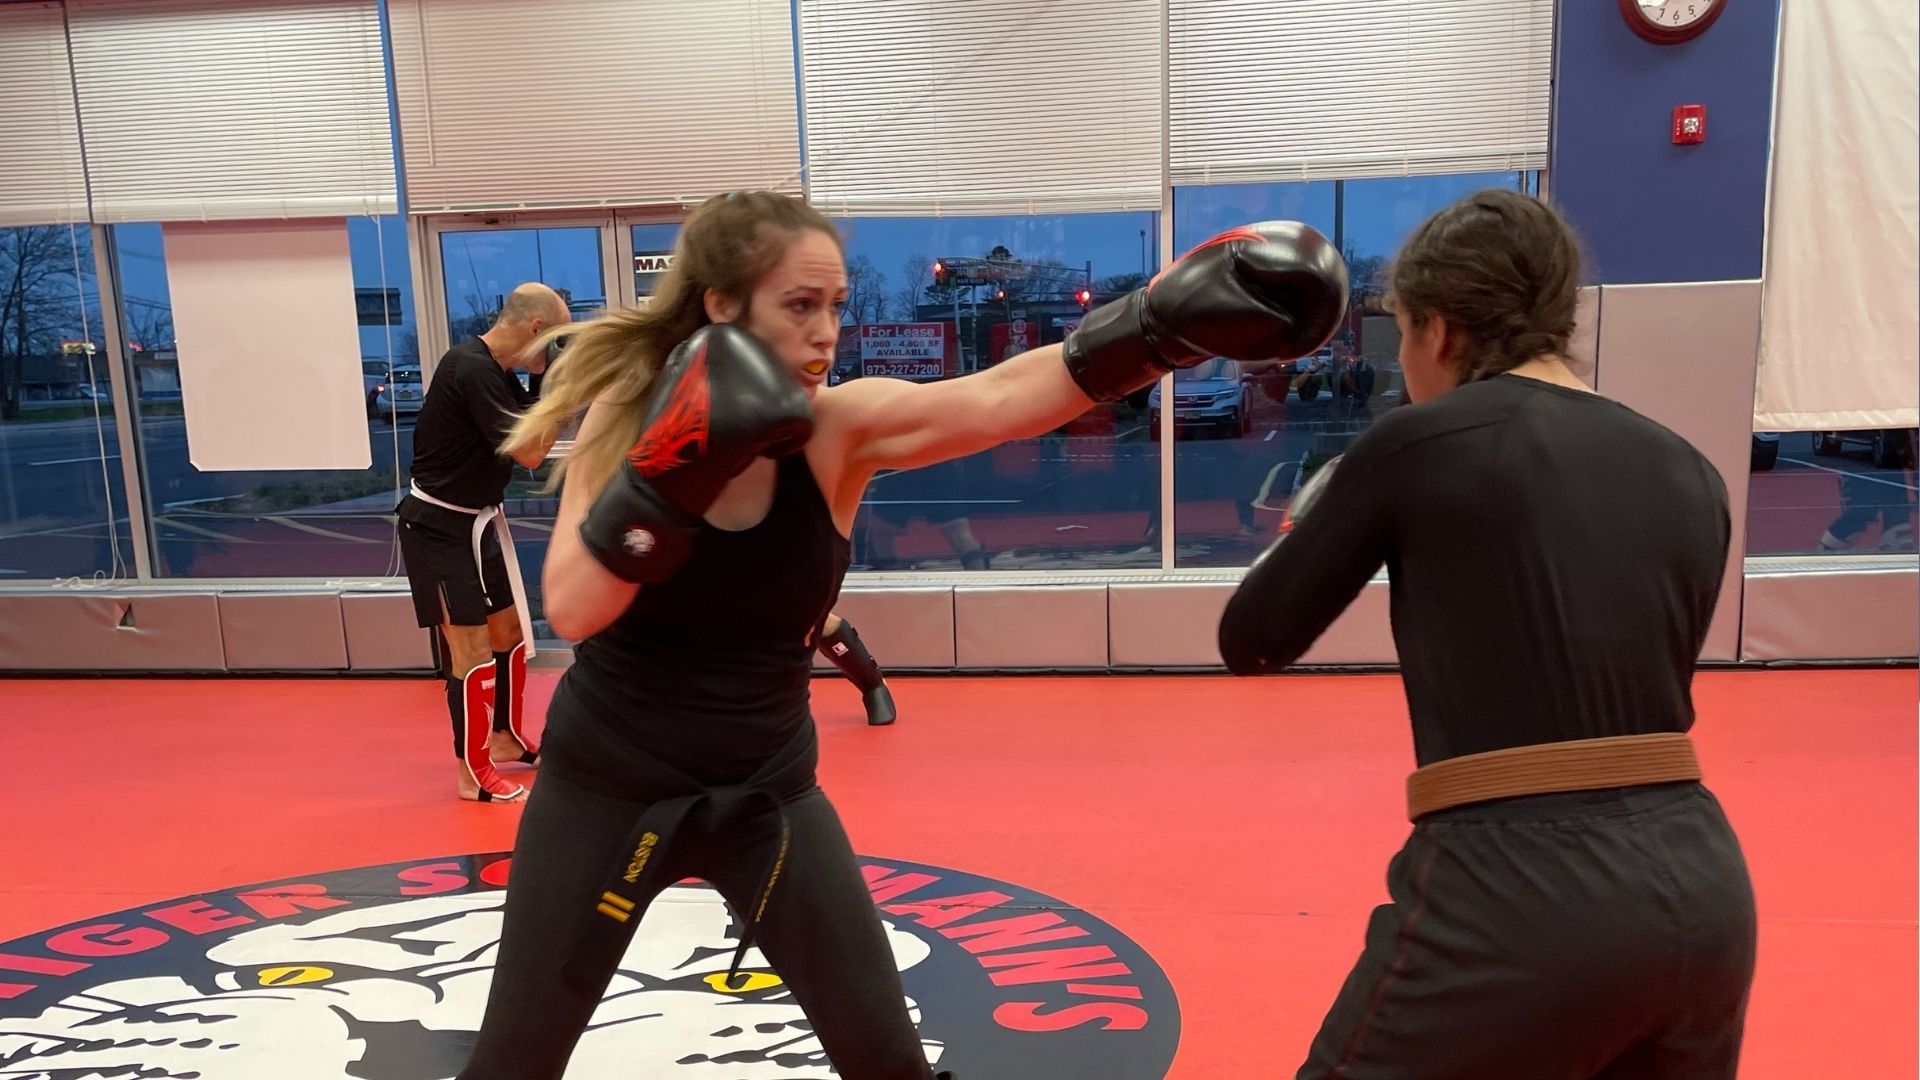 Two Girls Sparring During a Kickboxing Practice at Tiger Schulmann's Brick